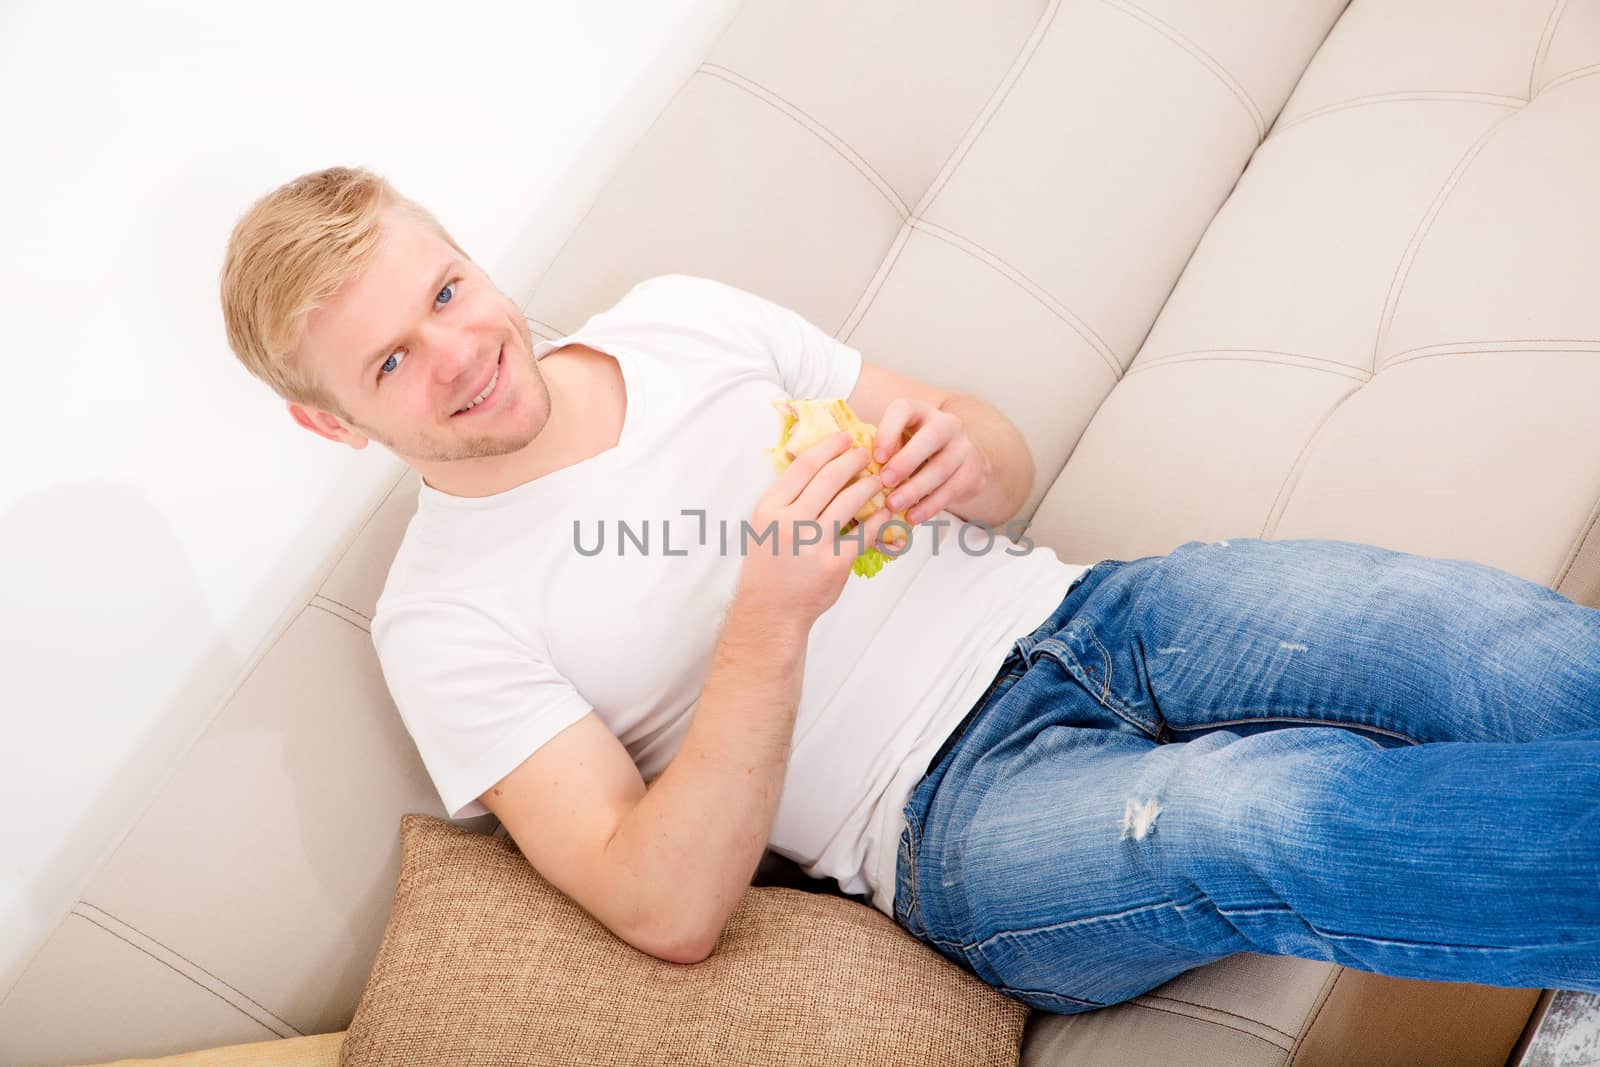 A young adult man eating a sandwich at home on the couch.
